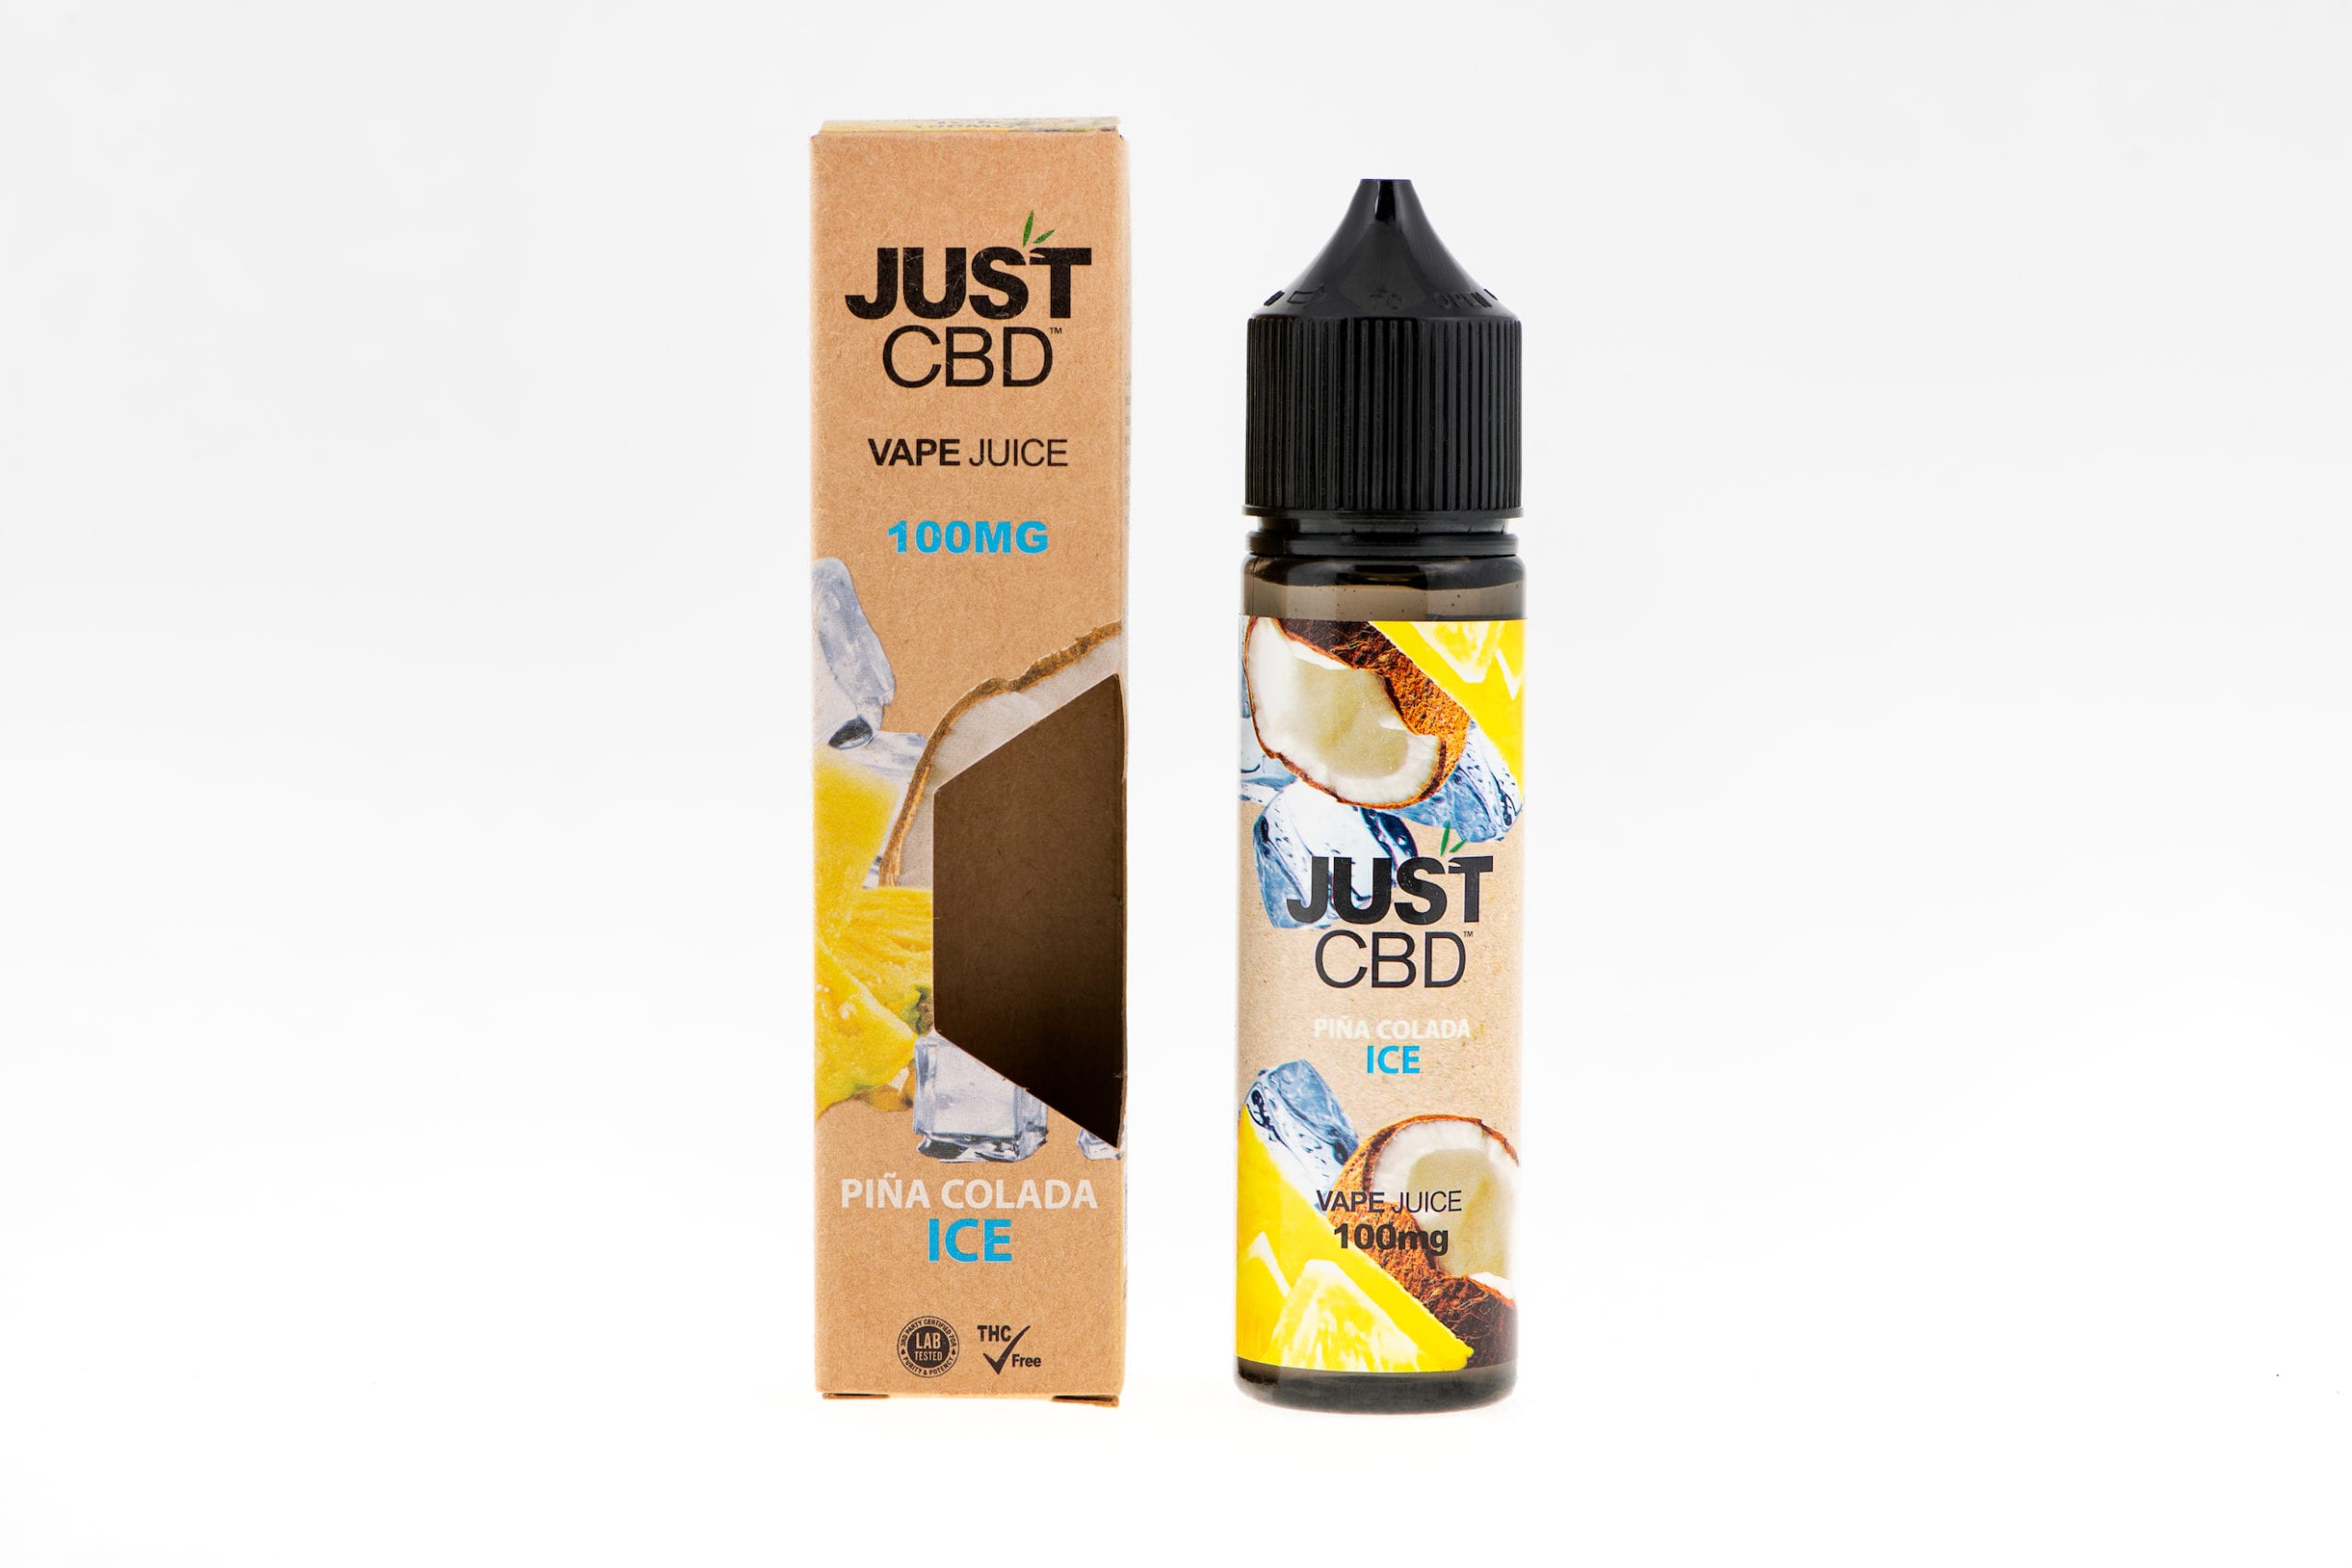 JustCBD Product Photography and Just CBD Products JUSTCBD Pina Colada ICE Vape Juice container and package on display